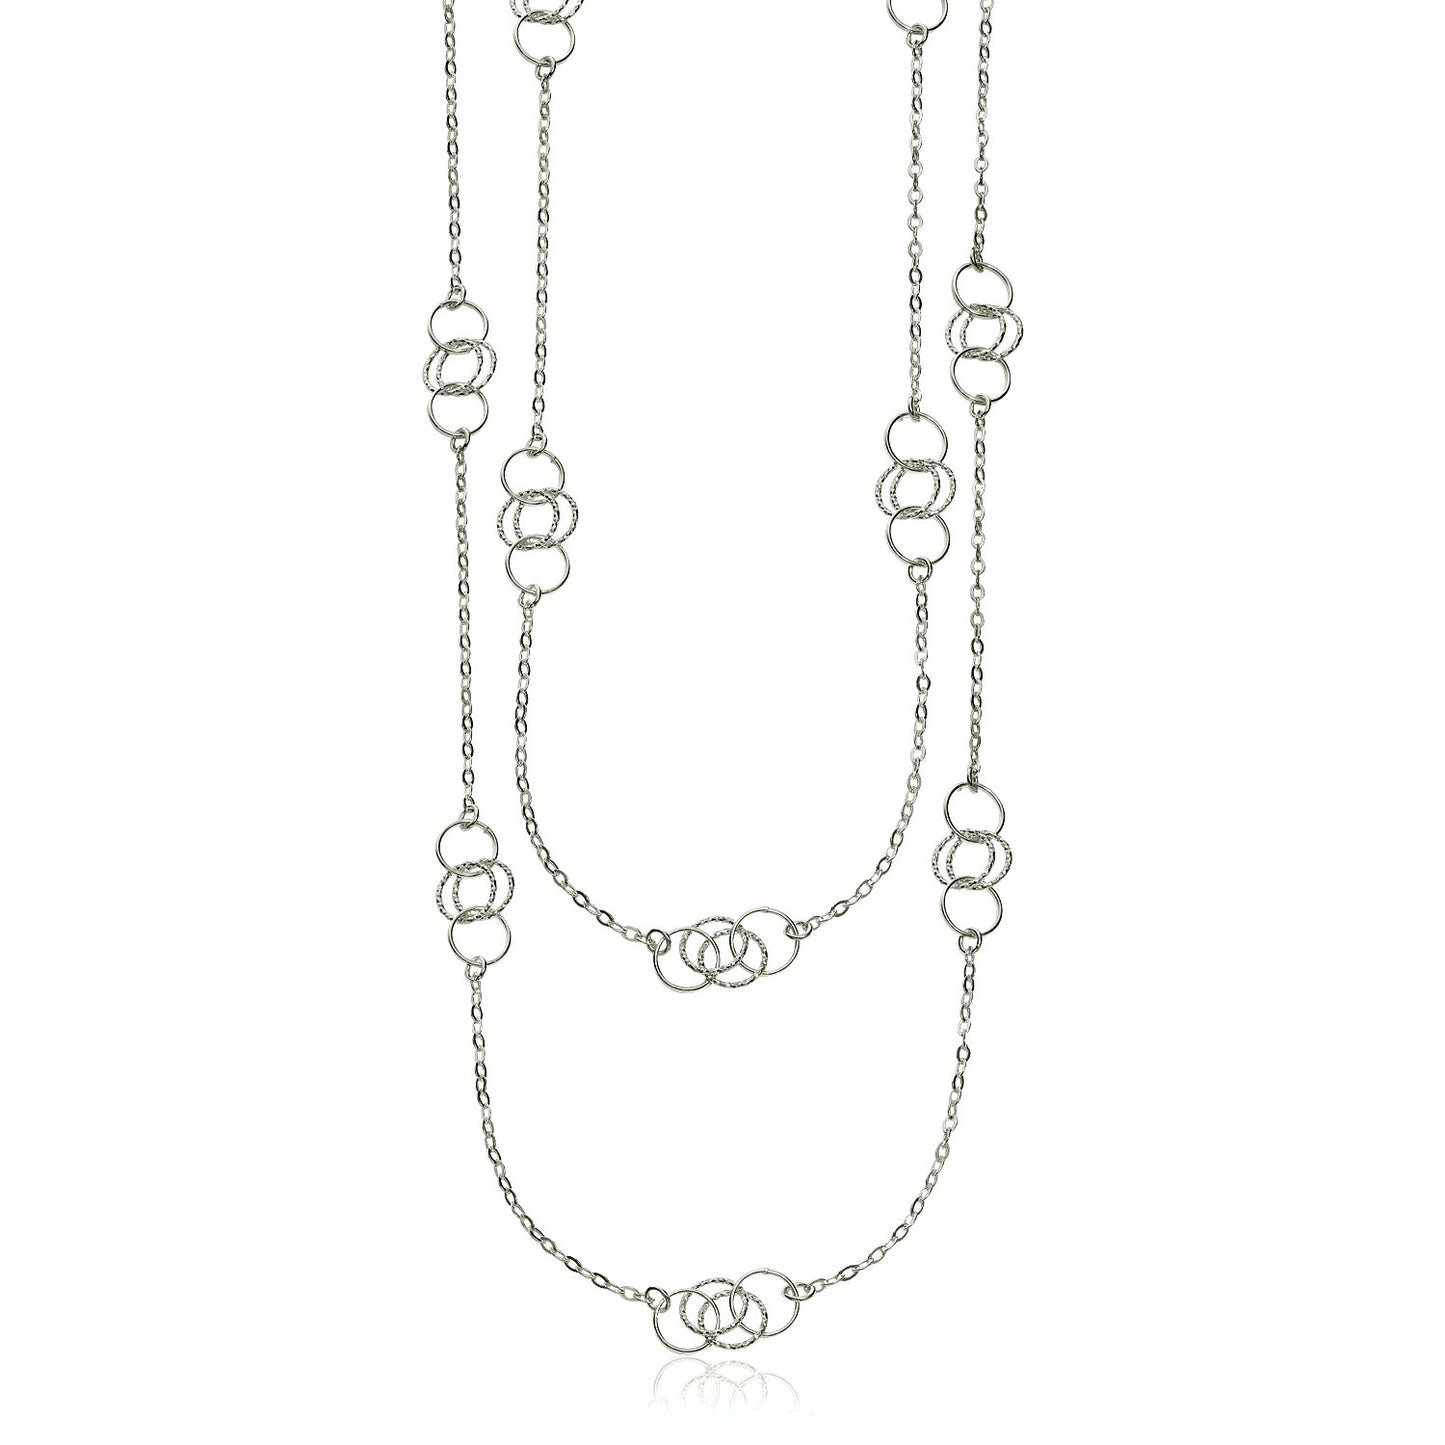 Sterling Silver 36 inch Two Strand Necklace with Interlocking Circle Stations